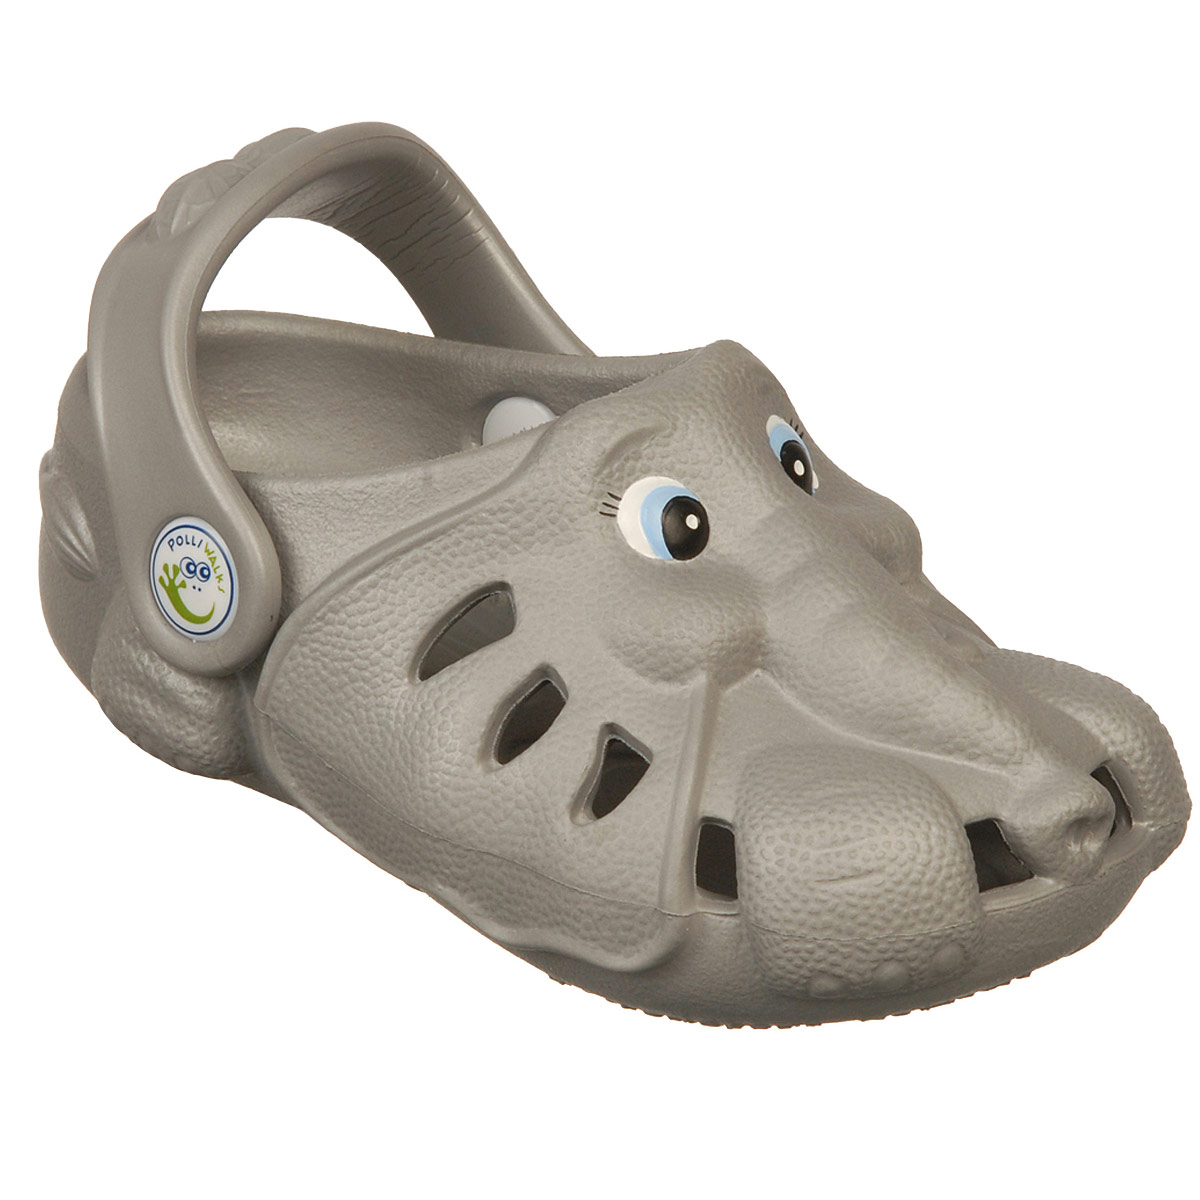 Polliwalks : Toddler shoes Ethan the ELEPHANT Gray # 12